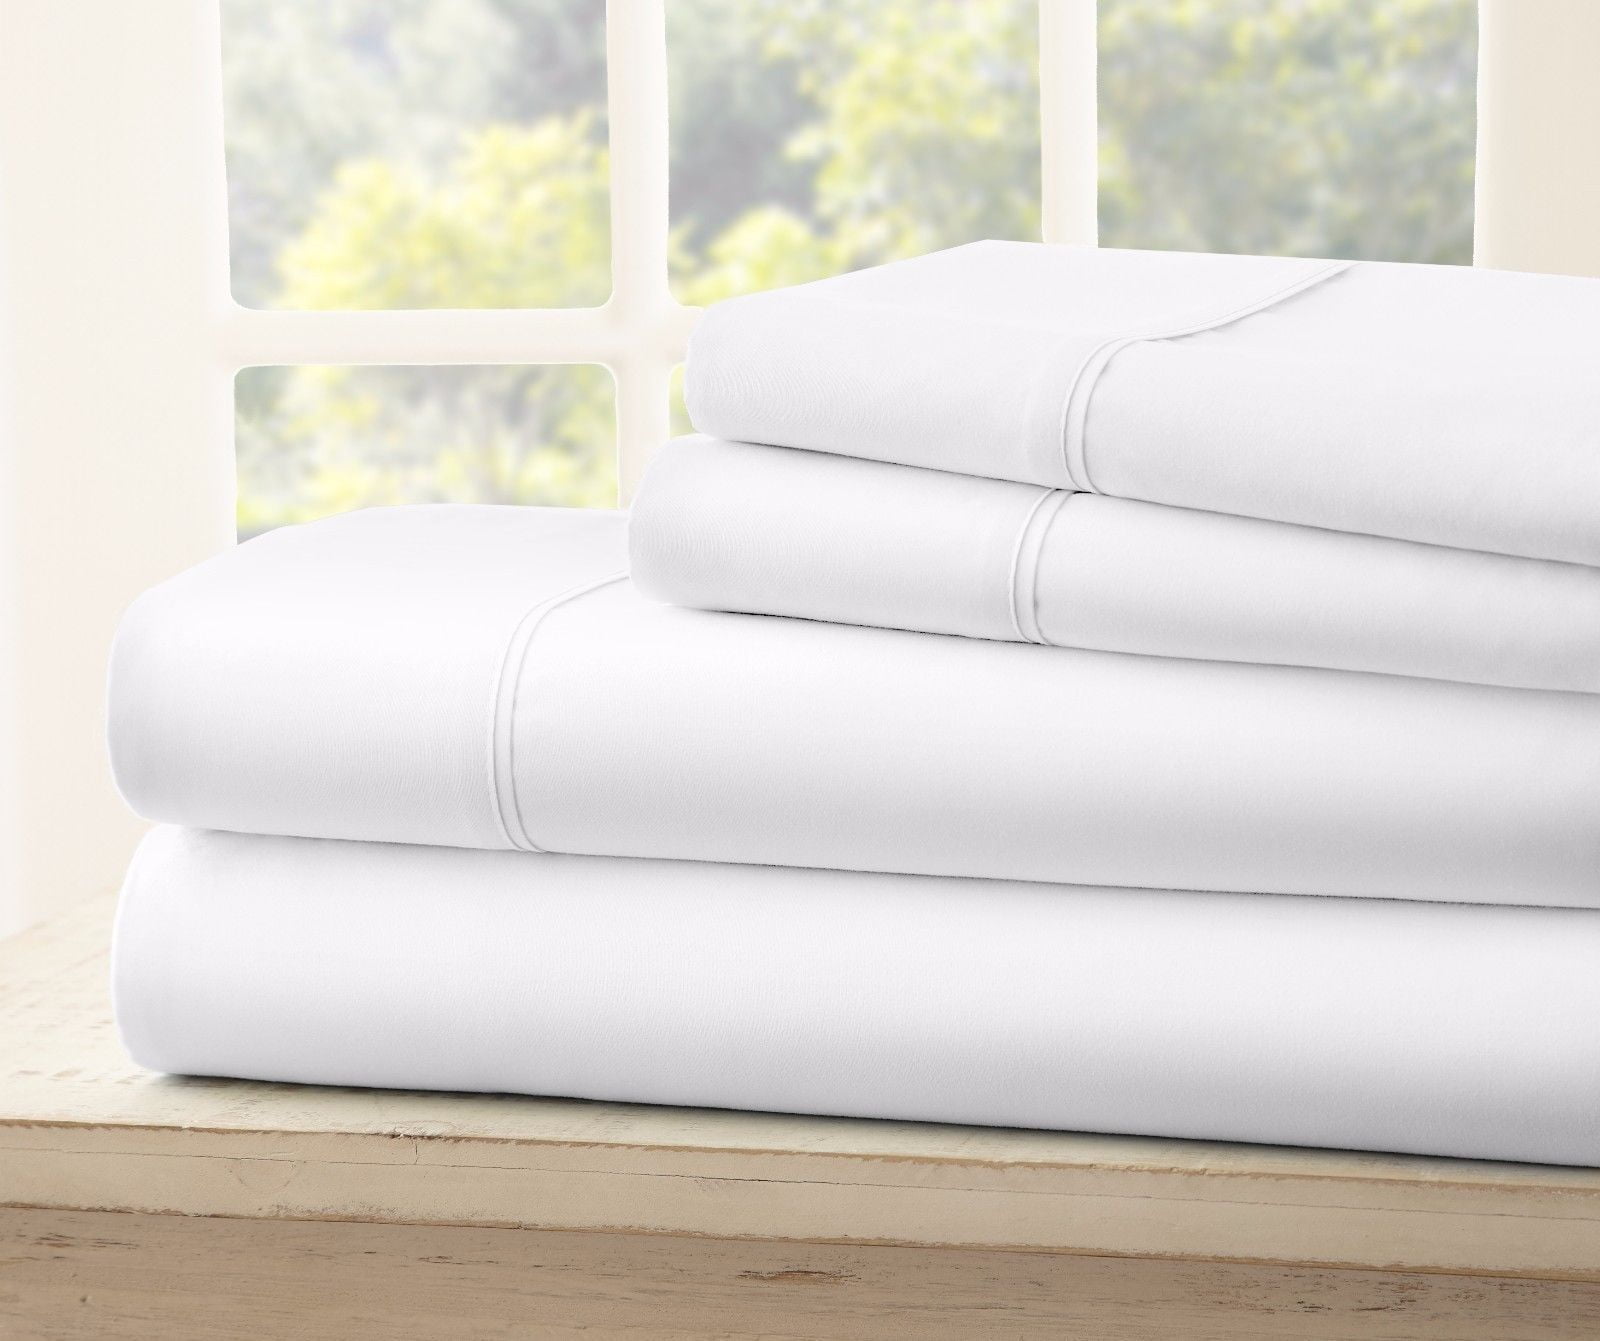 Natural Bamboo Viscose Rayon Blend Solid Double/Full 6-Piece Bed Sheets Set with 15 inch Extra Deep Pockets Bed Sheets Set by Bamboo Home Healthy Hypoallergenic and Antibacterial Eco Friendly Cool Comfortable Ultra Soft Silky Bamboo Bedding Sheets-Wrinkl